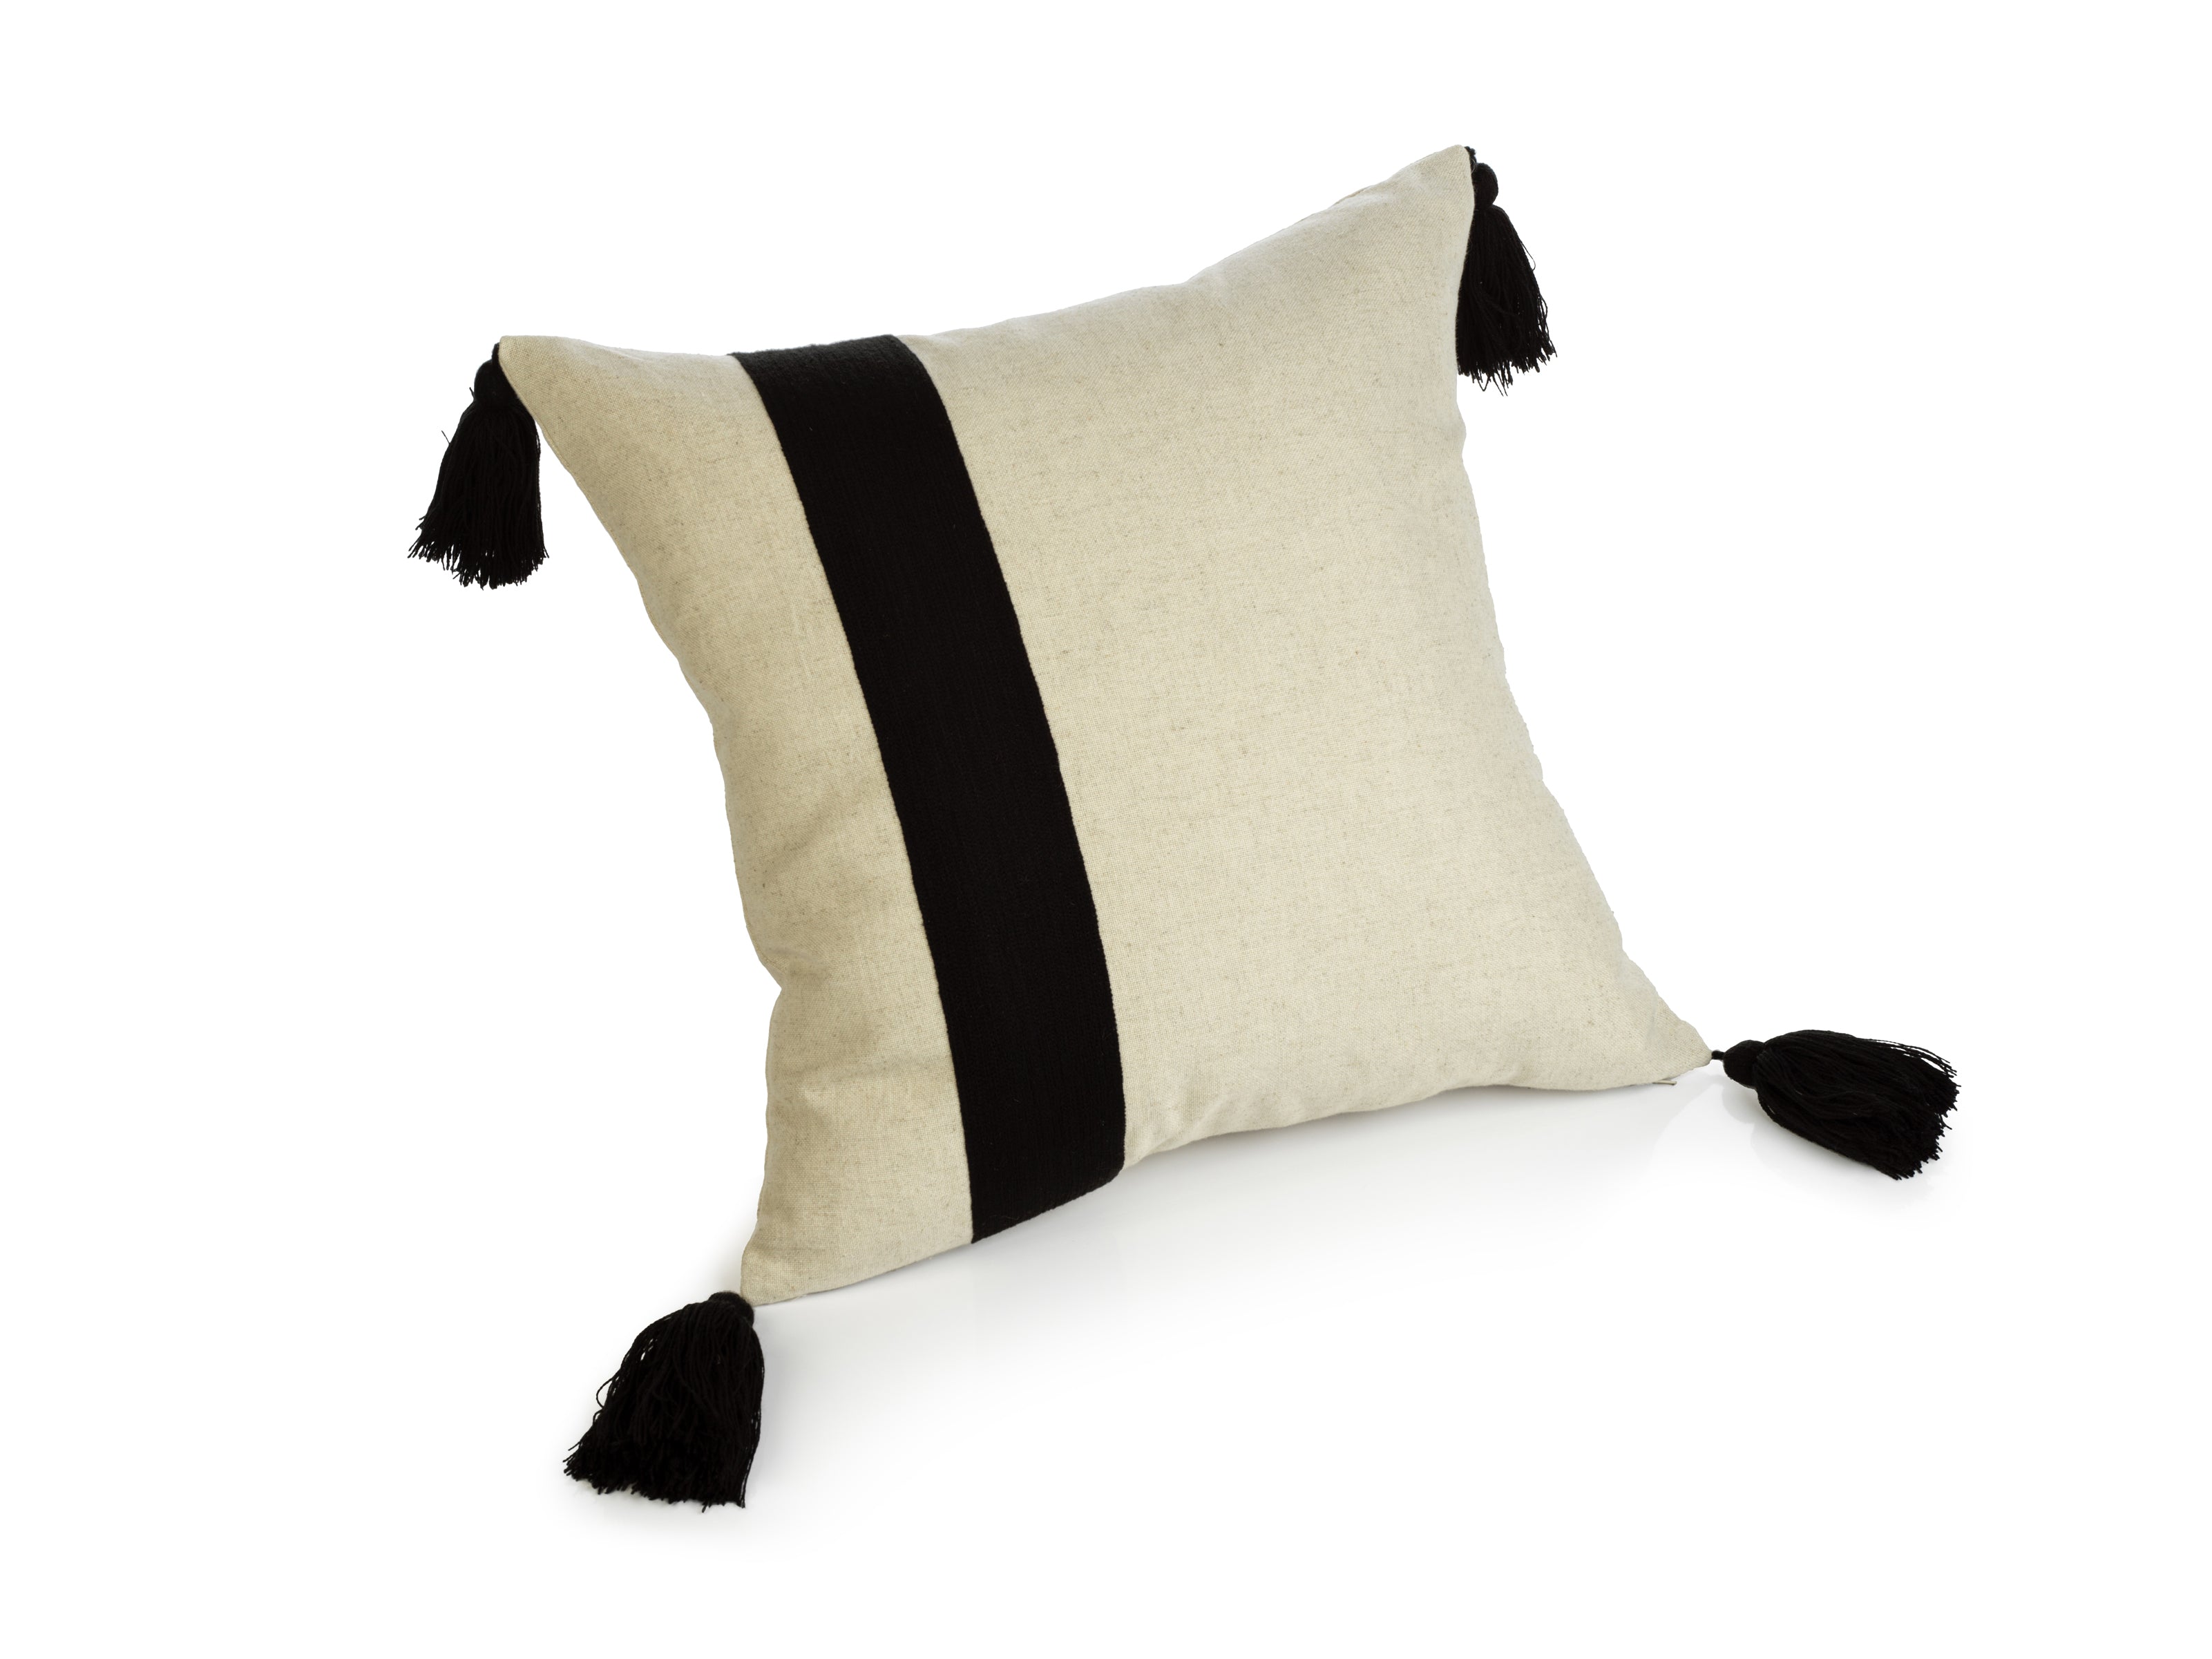 Polignano Embroidered Throw Pillow w/Tassels - Black - CARLYLE AVENUE